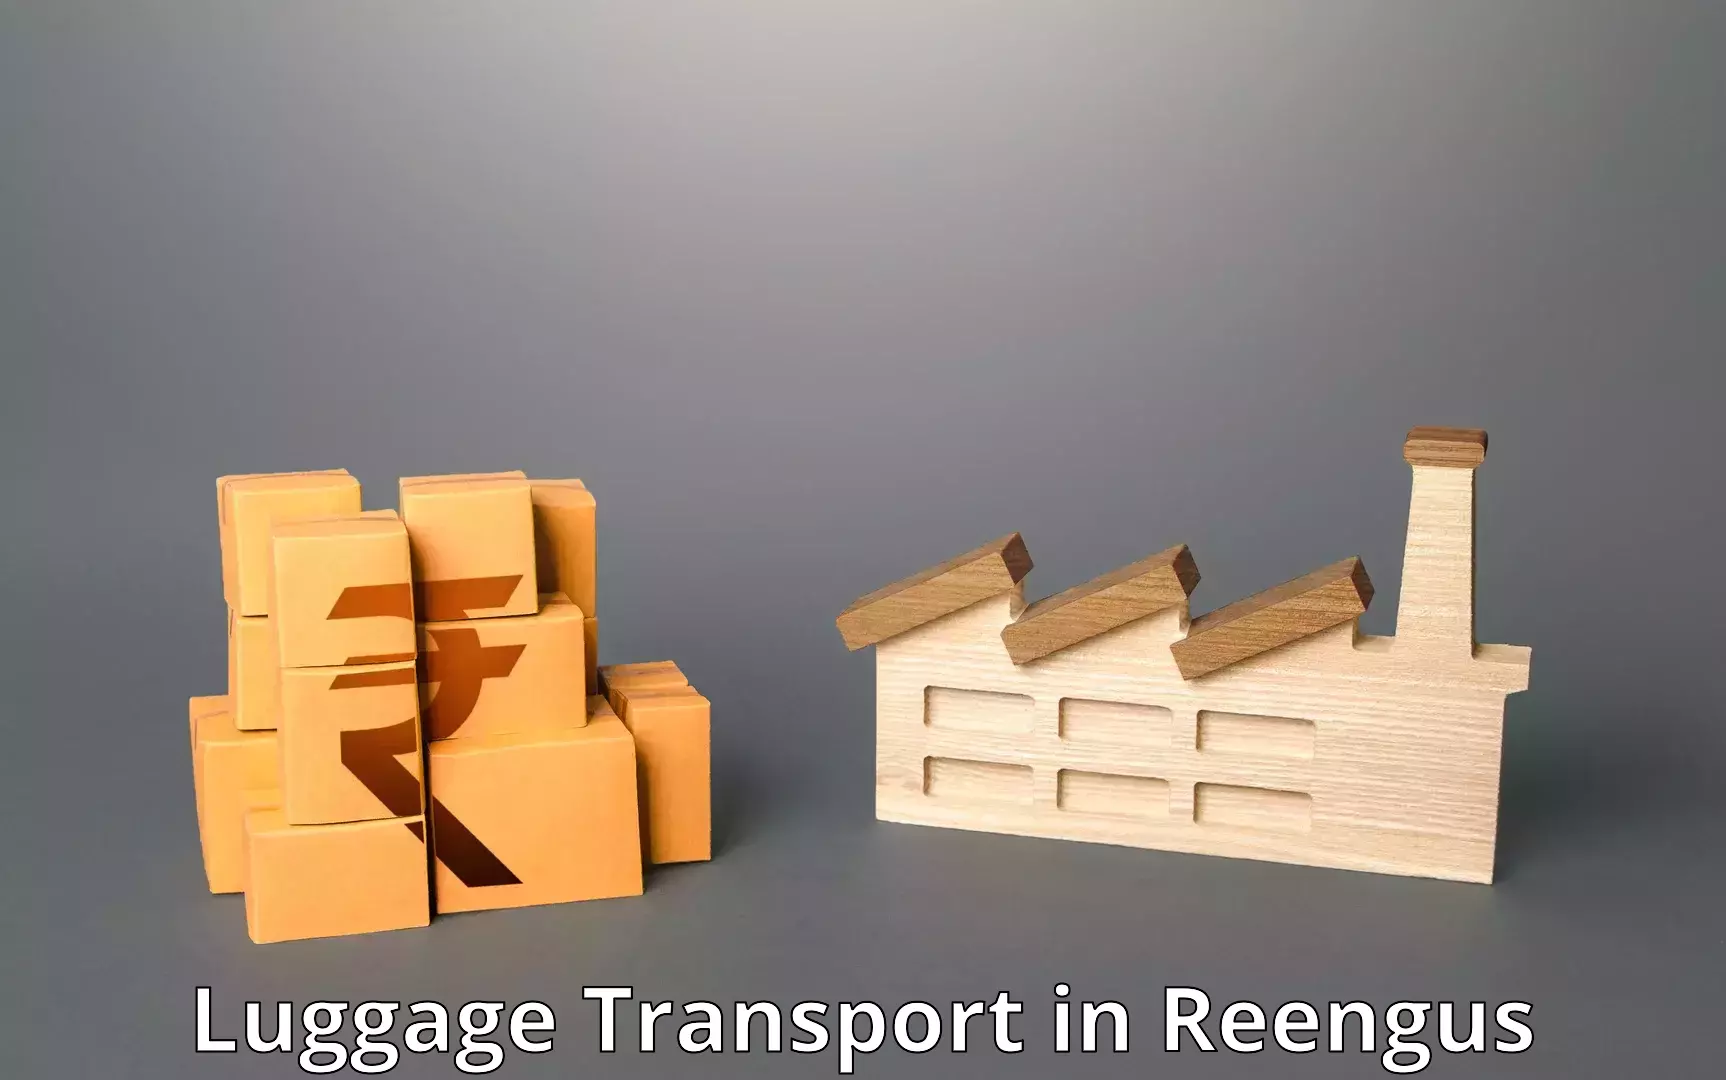 Luggage transport guidelines in Reengus